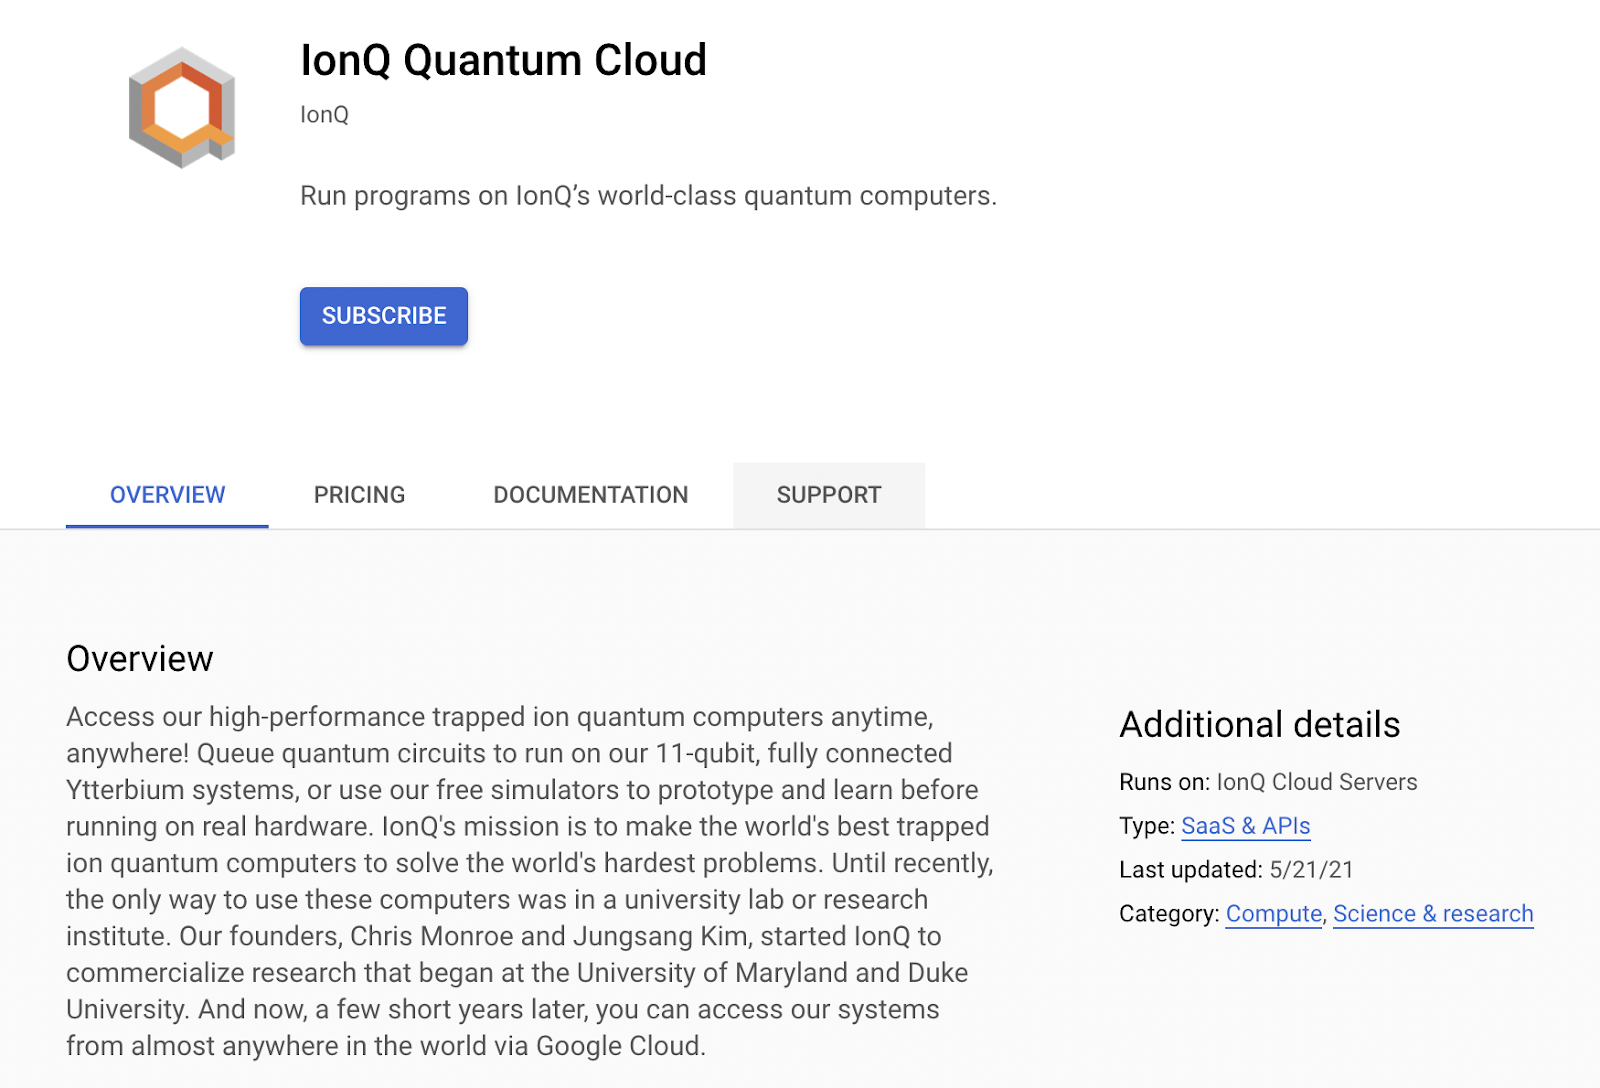 screenshot of the IonQ Quantum Cloud page in google cloud marketplace